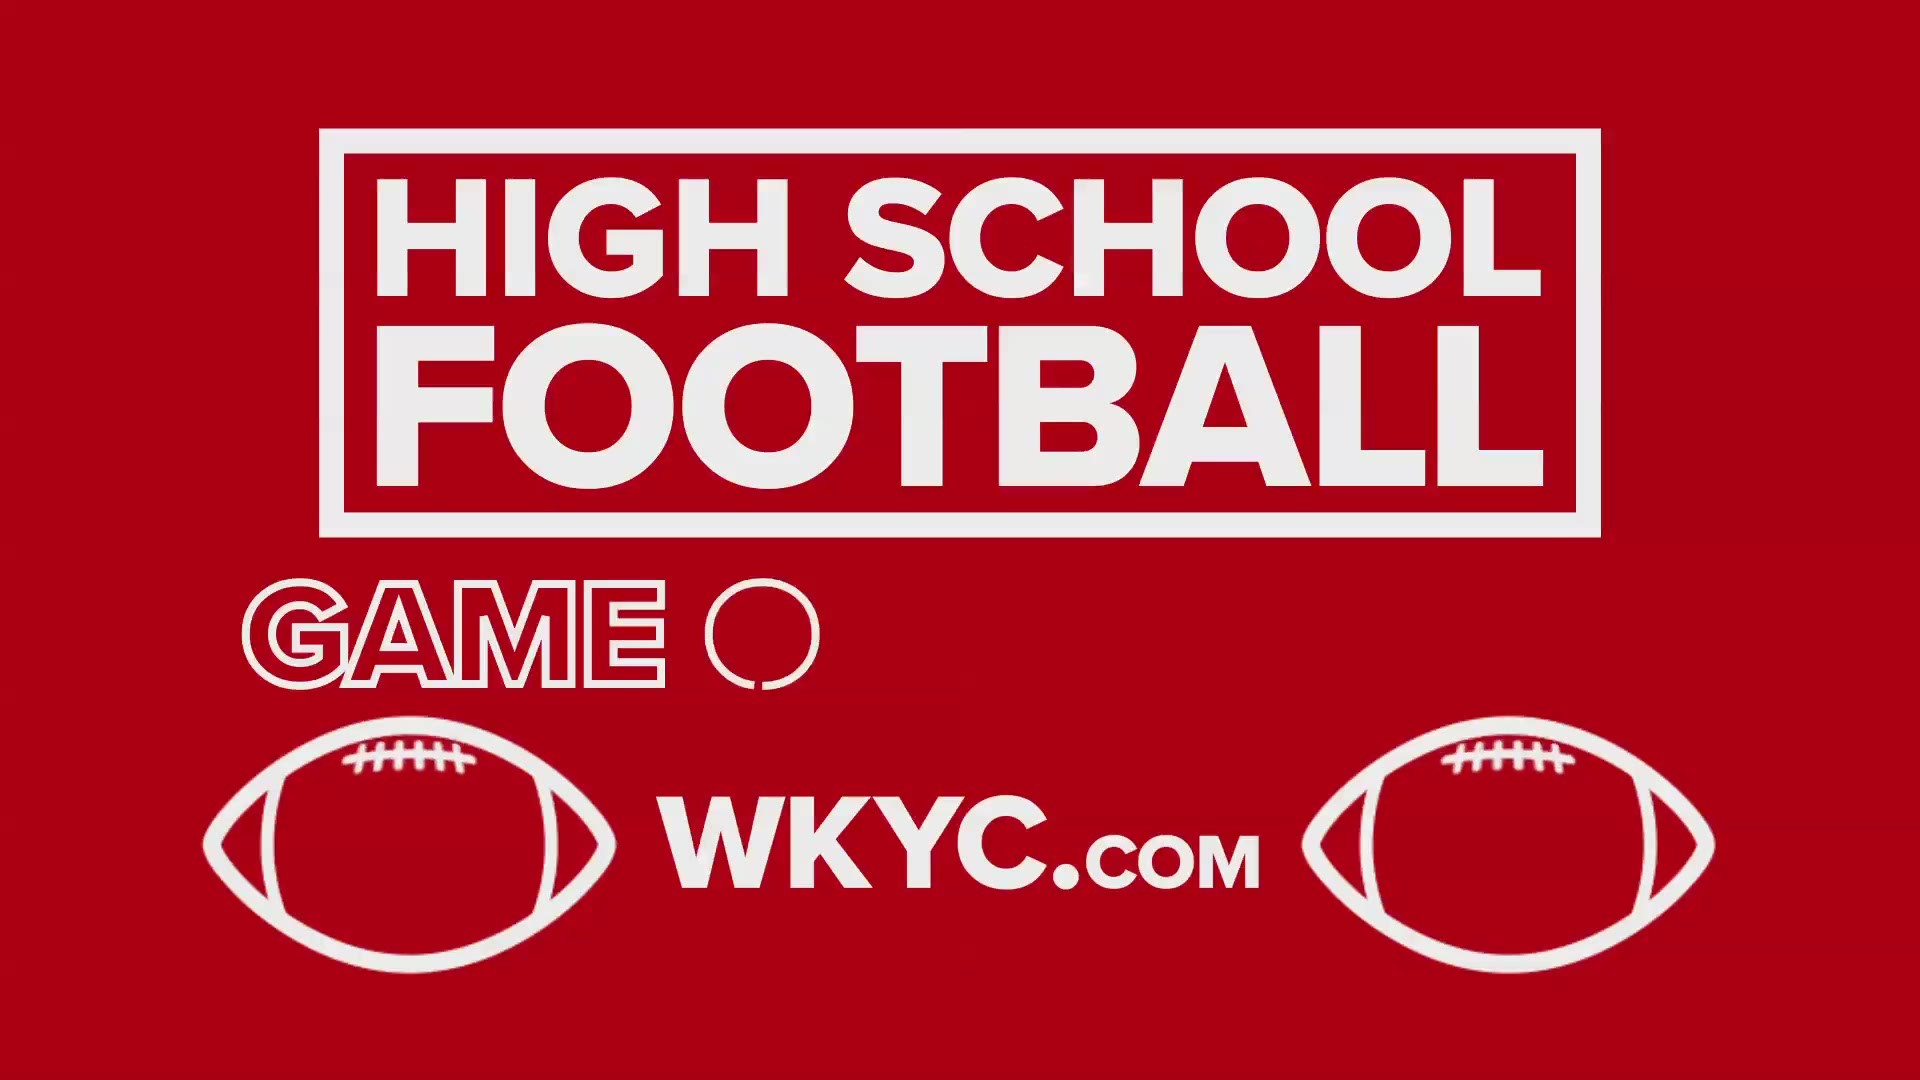 WKYC.com's High School Football Game of the Week. What a game in Brunswick!  The Blue Devils get their first win of the year beating Medina 28-21.